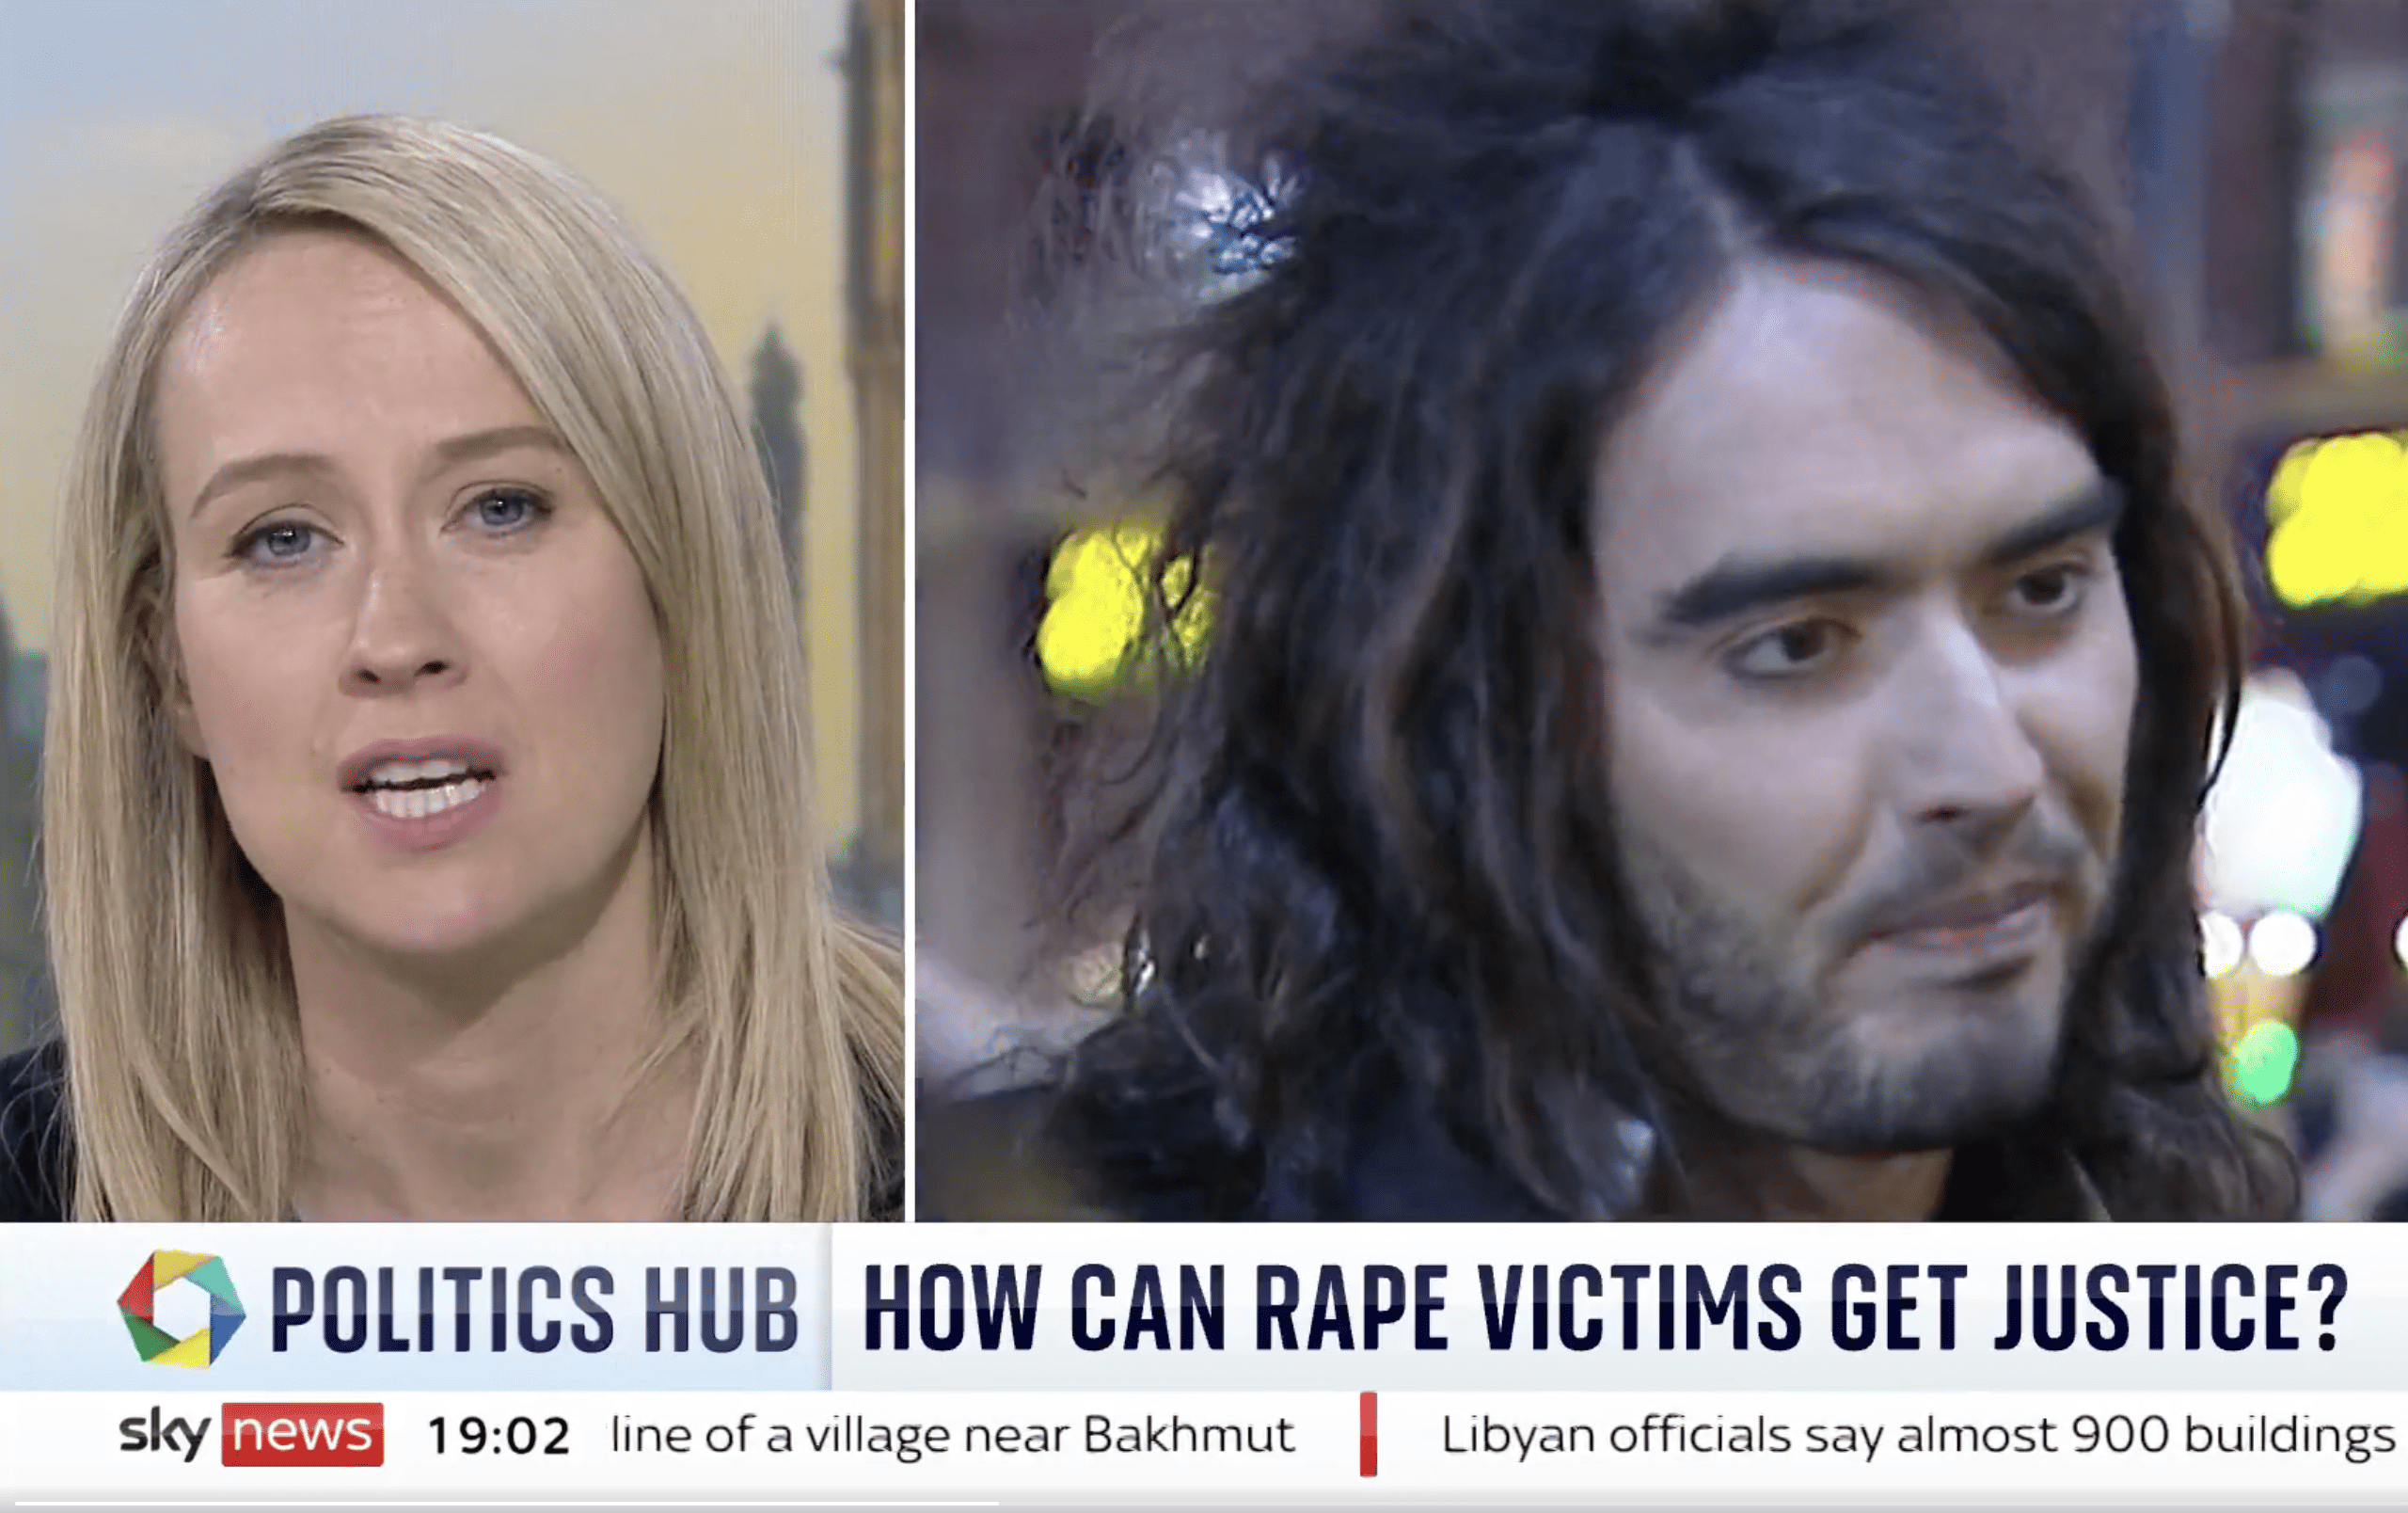 Sophy Ridge take on Russell Brand story is essential viewing